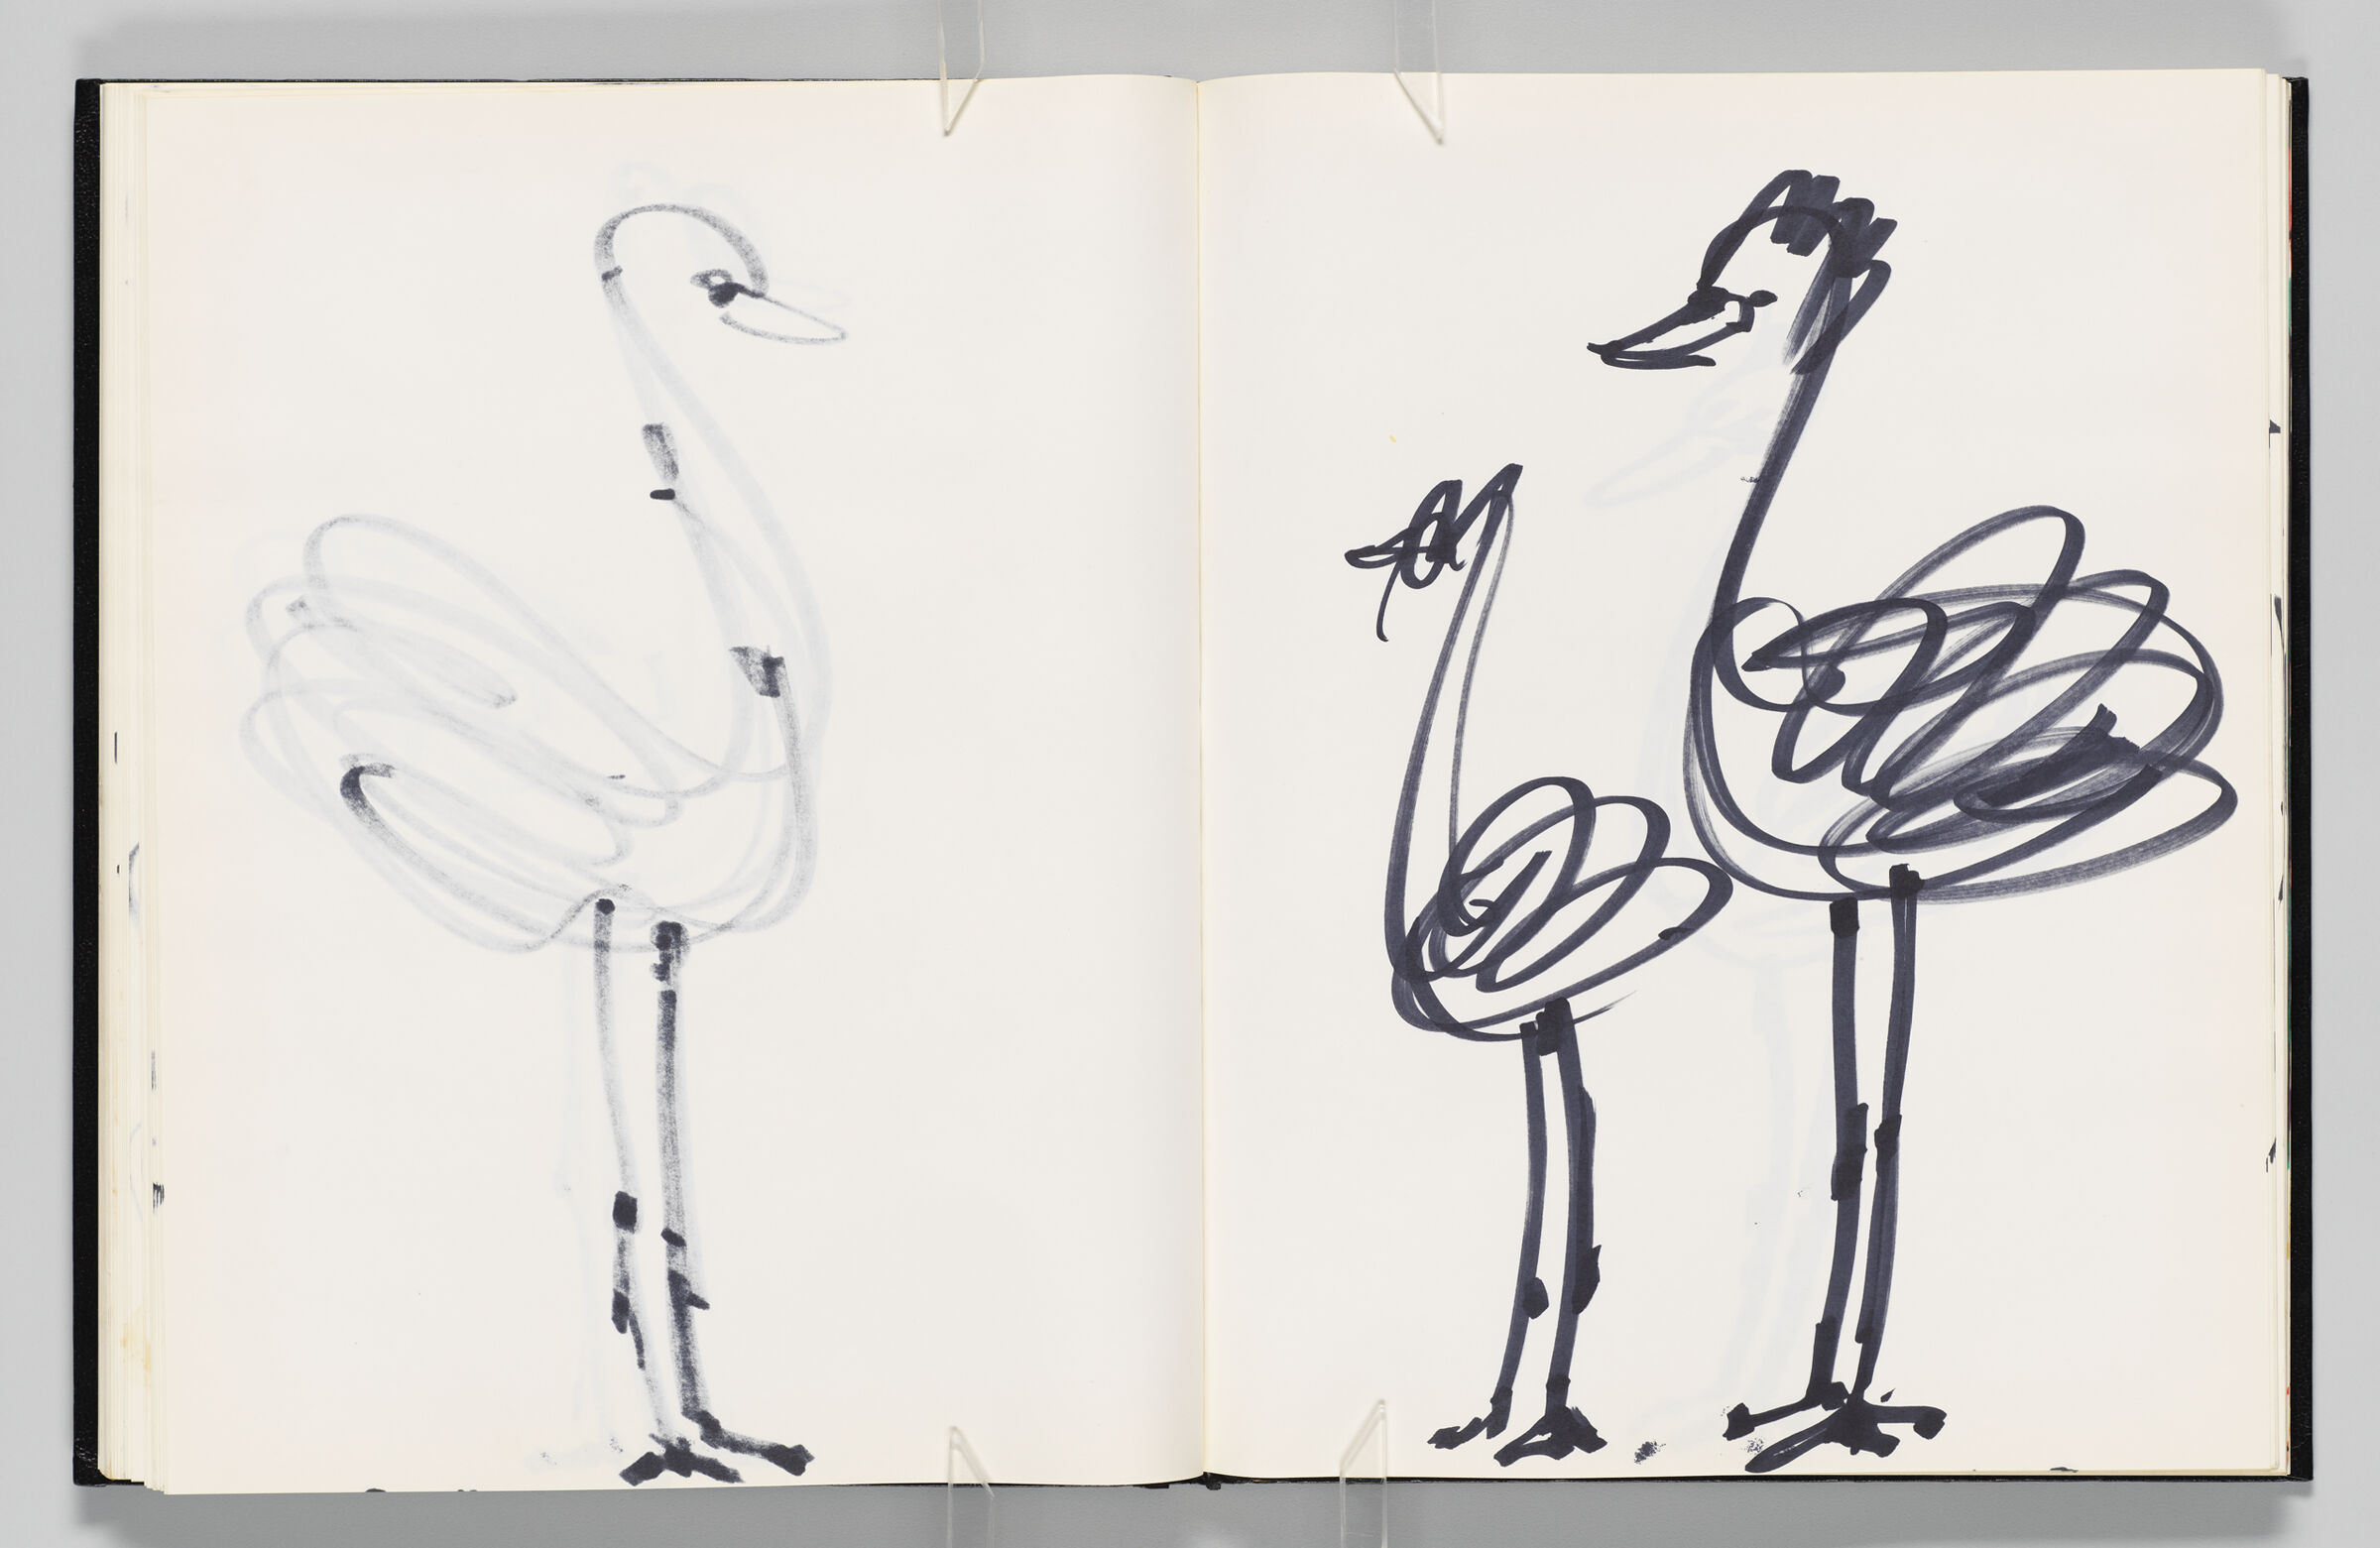 Untitled (Bleed-Through Of Previous Page, Left Page); Untitled (Ostriches, Right Page)